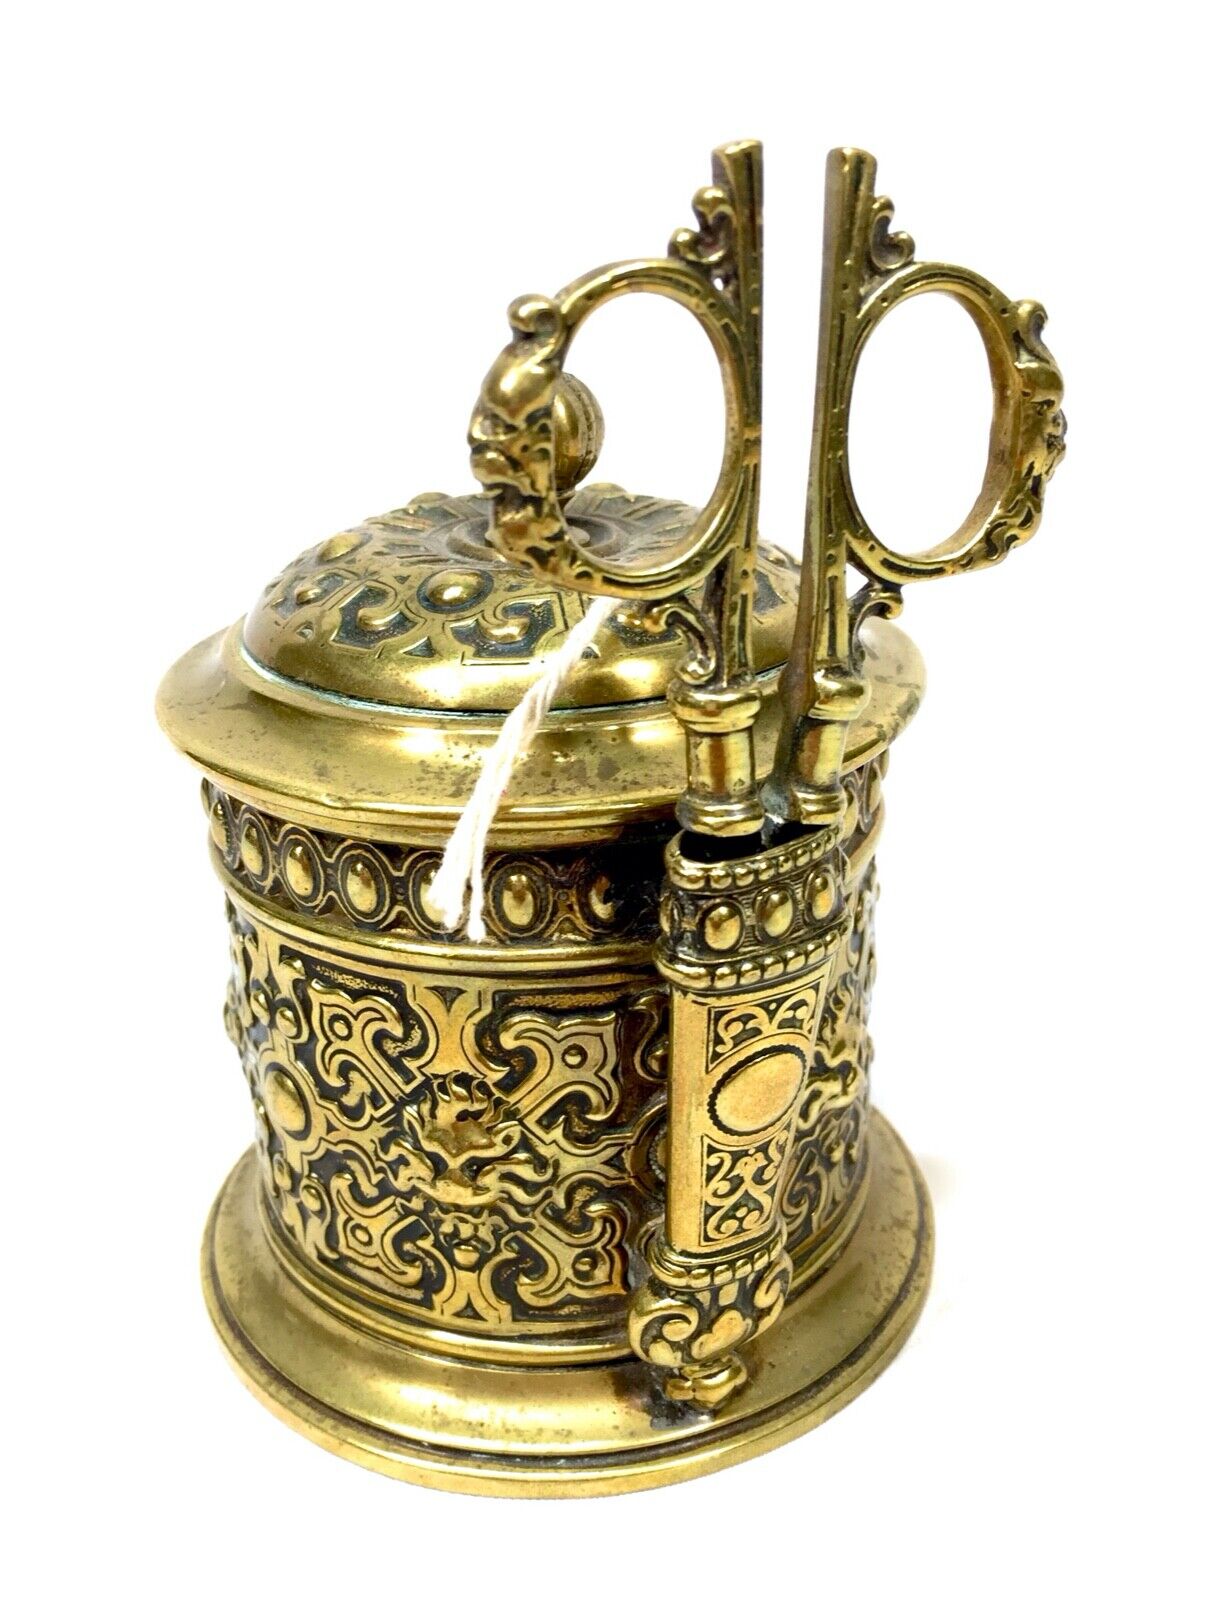 Antique Brass String Box / Dispenser With Scissors by Adolph Frankau & Co c.1870